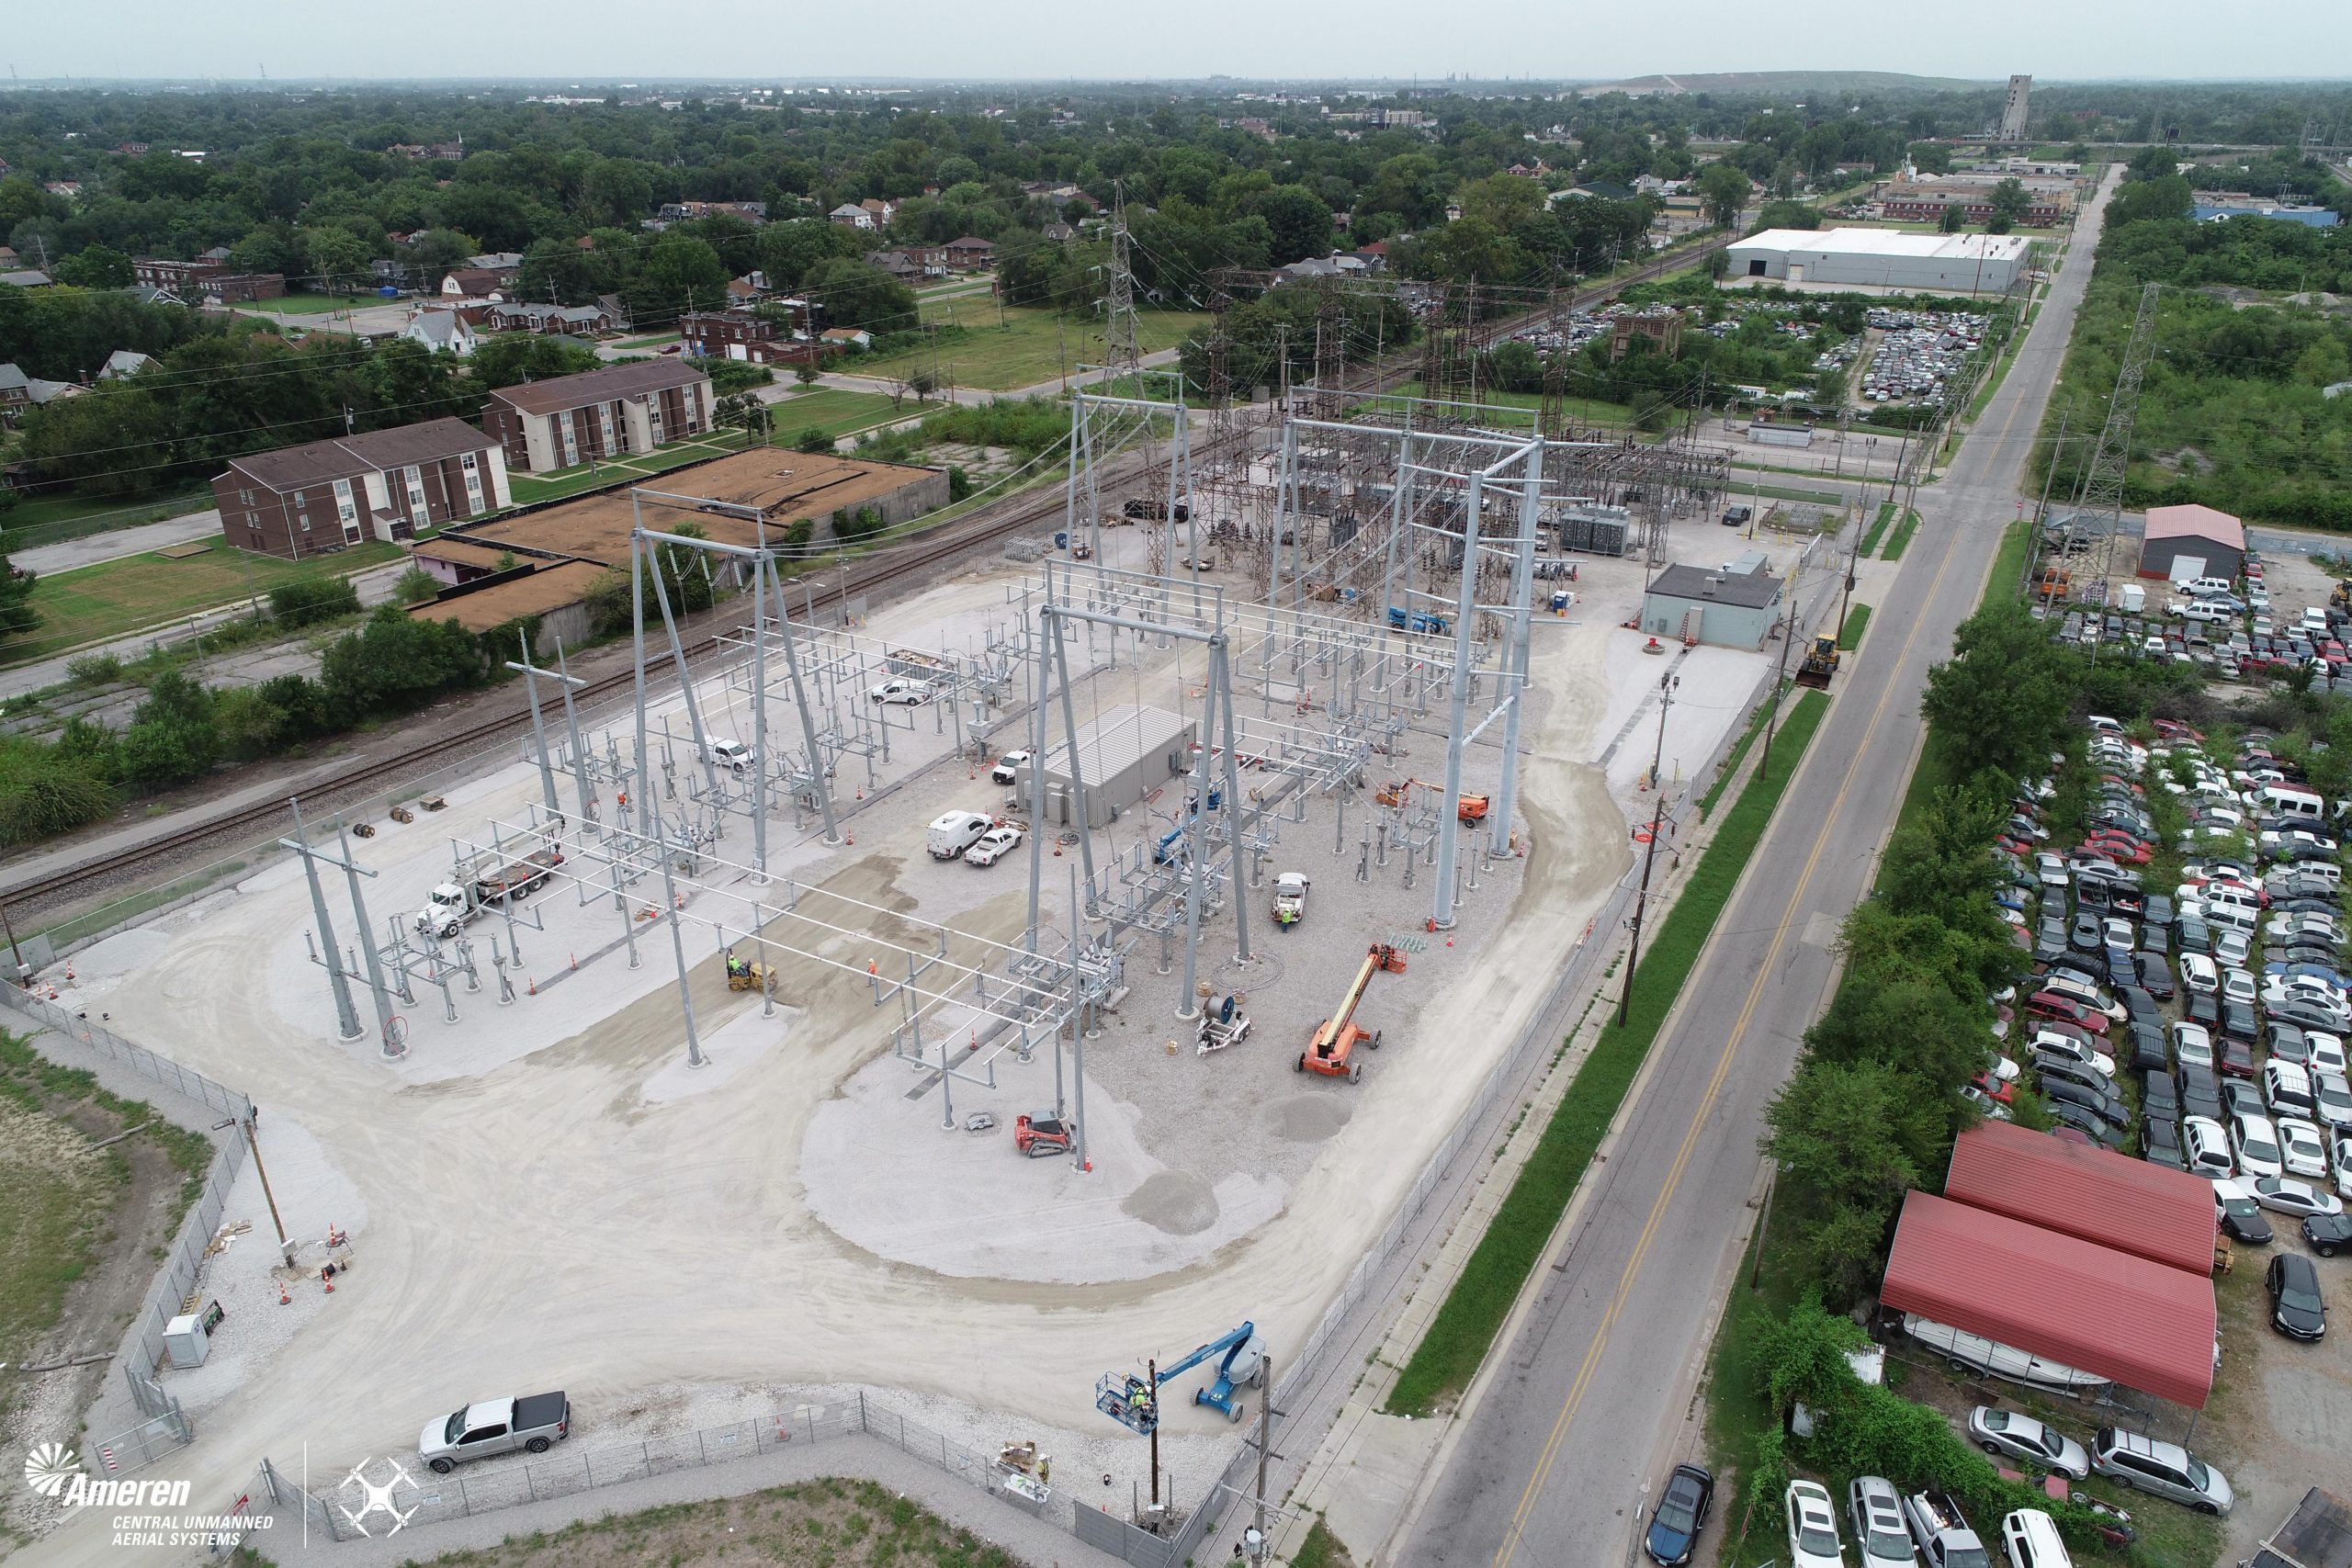 ameren-to-build-new-substation-in-east-st-louis-area-cip-news